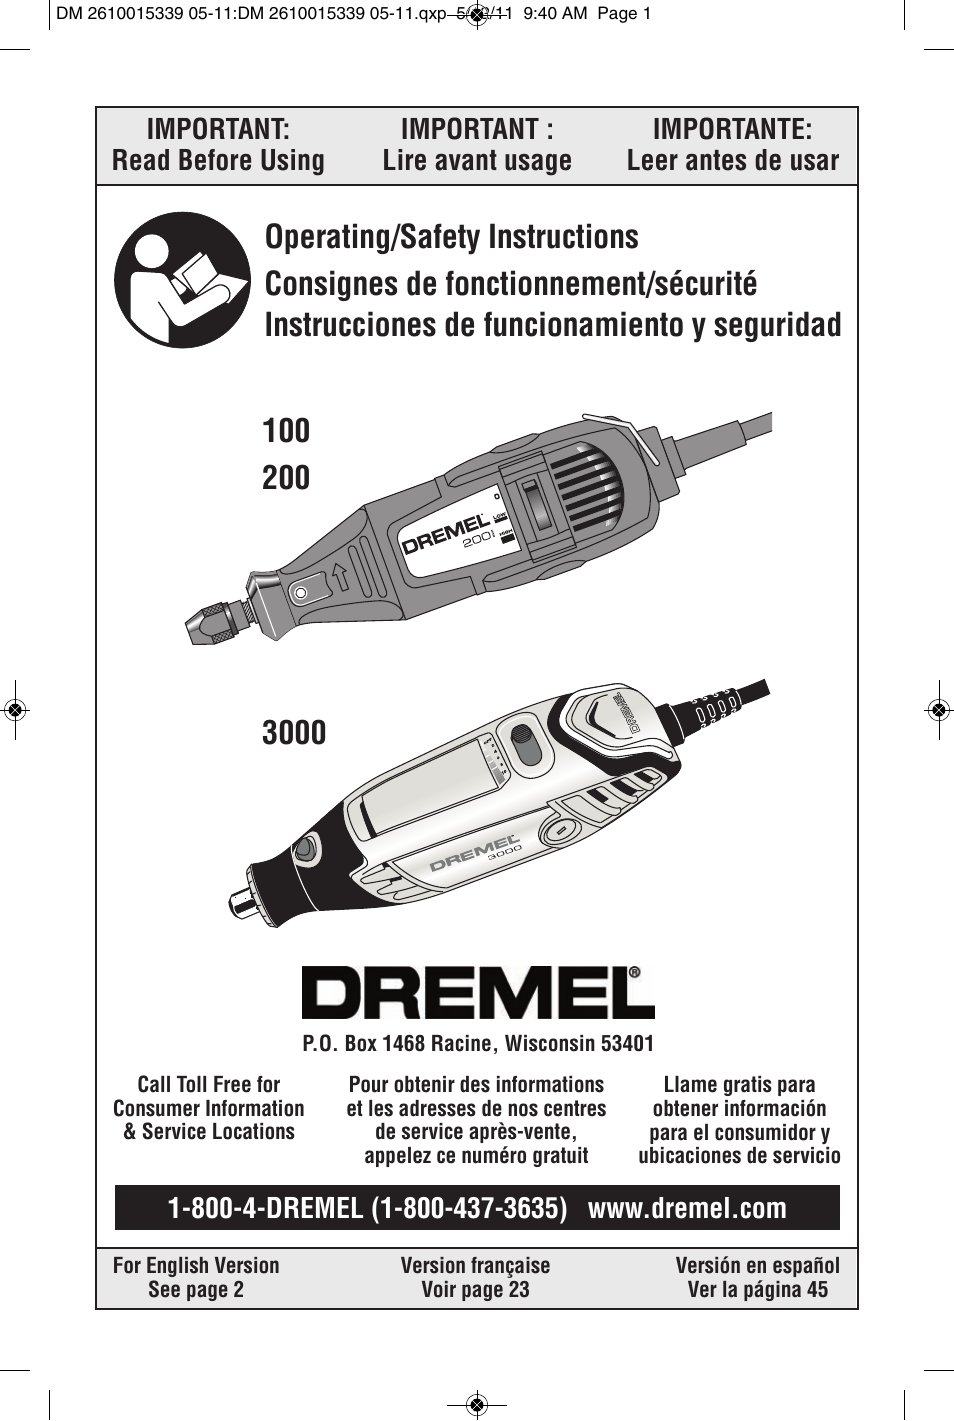 Dremel 3000 User Manual | 68 pages | Original mode | Also for: 200, 100